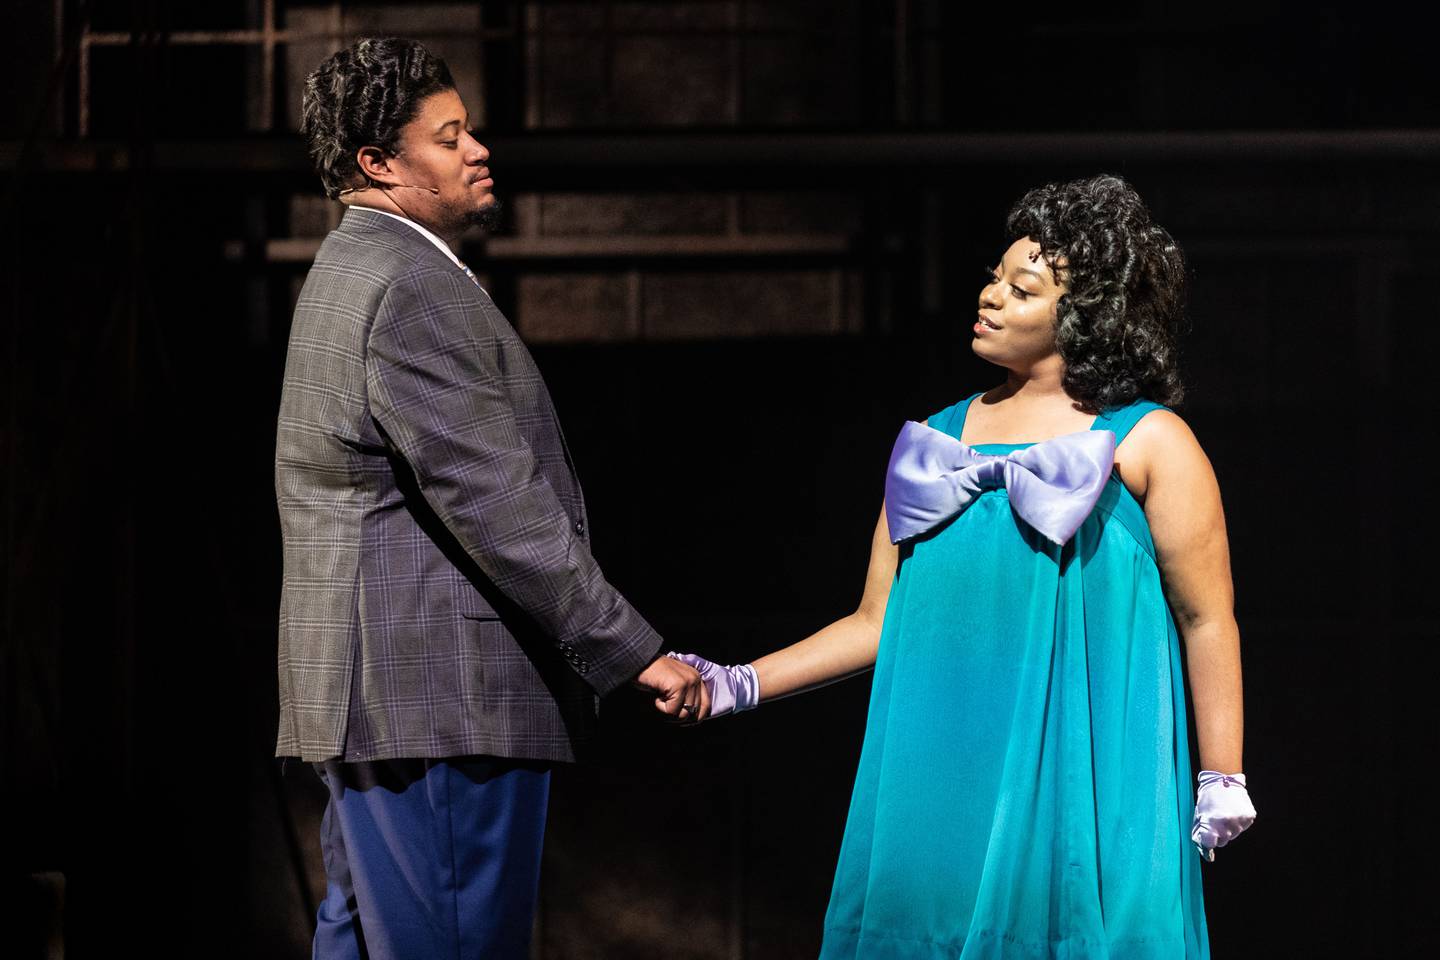 Lorenzo Rush Jr. (left) plays Curtis Taylor, Jr. and Naima Alakham is Effie in Dreamgirls, Paramount Theatre’s 2022-23 Broadway Series opener, playing now through October 16, 2022. For tickets and information, visit paramountaurora.com or call (630) 896-6666. Photo credit: Liz Lauren